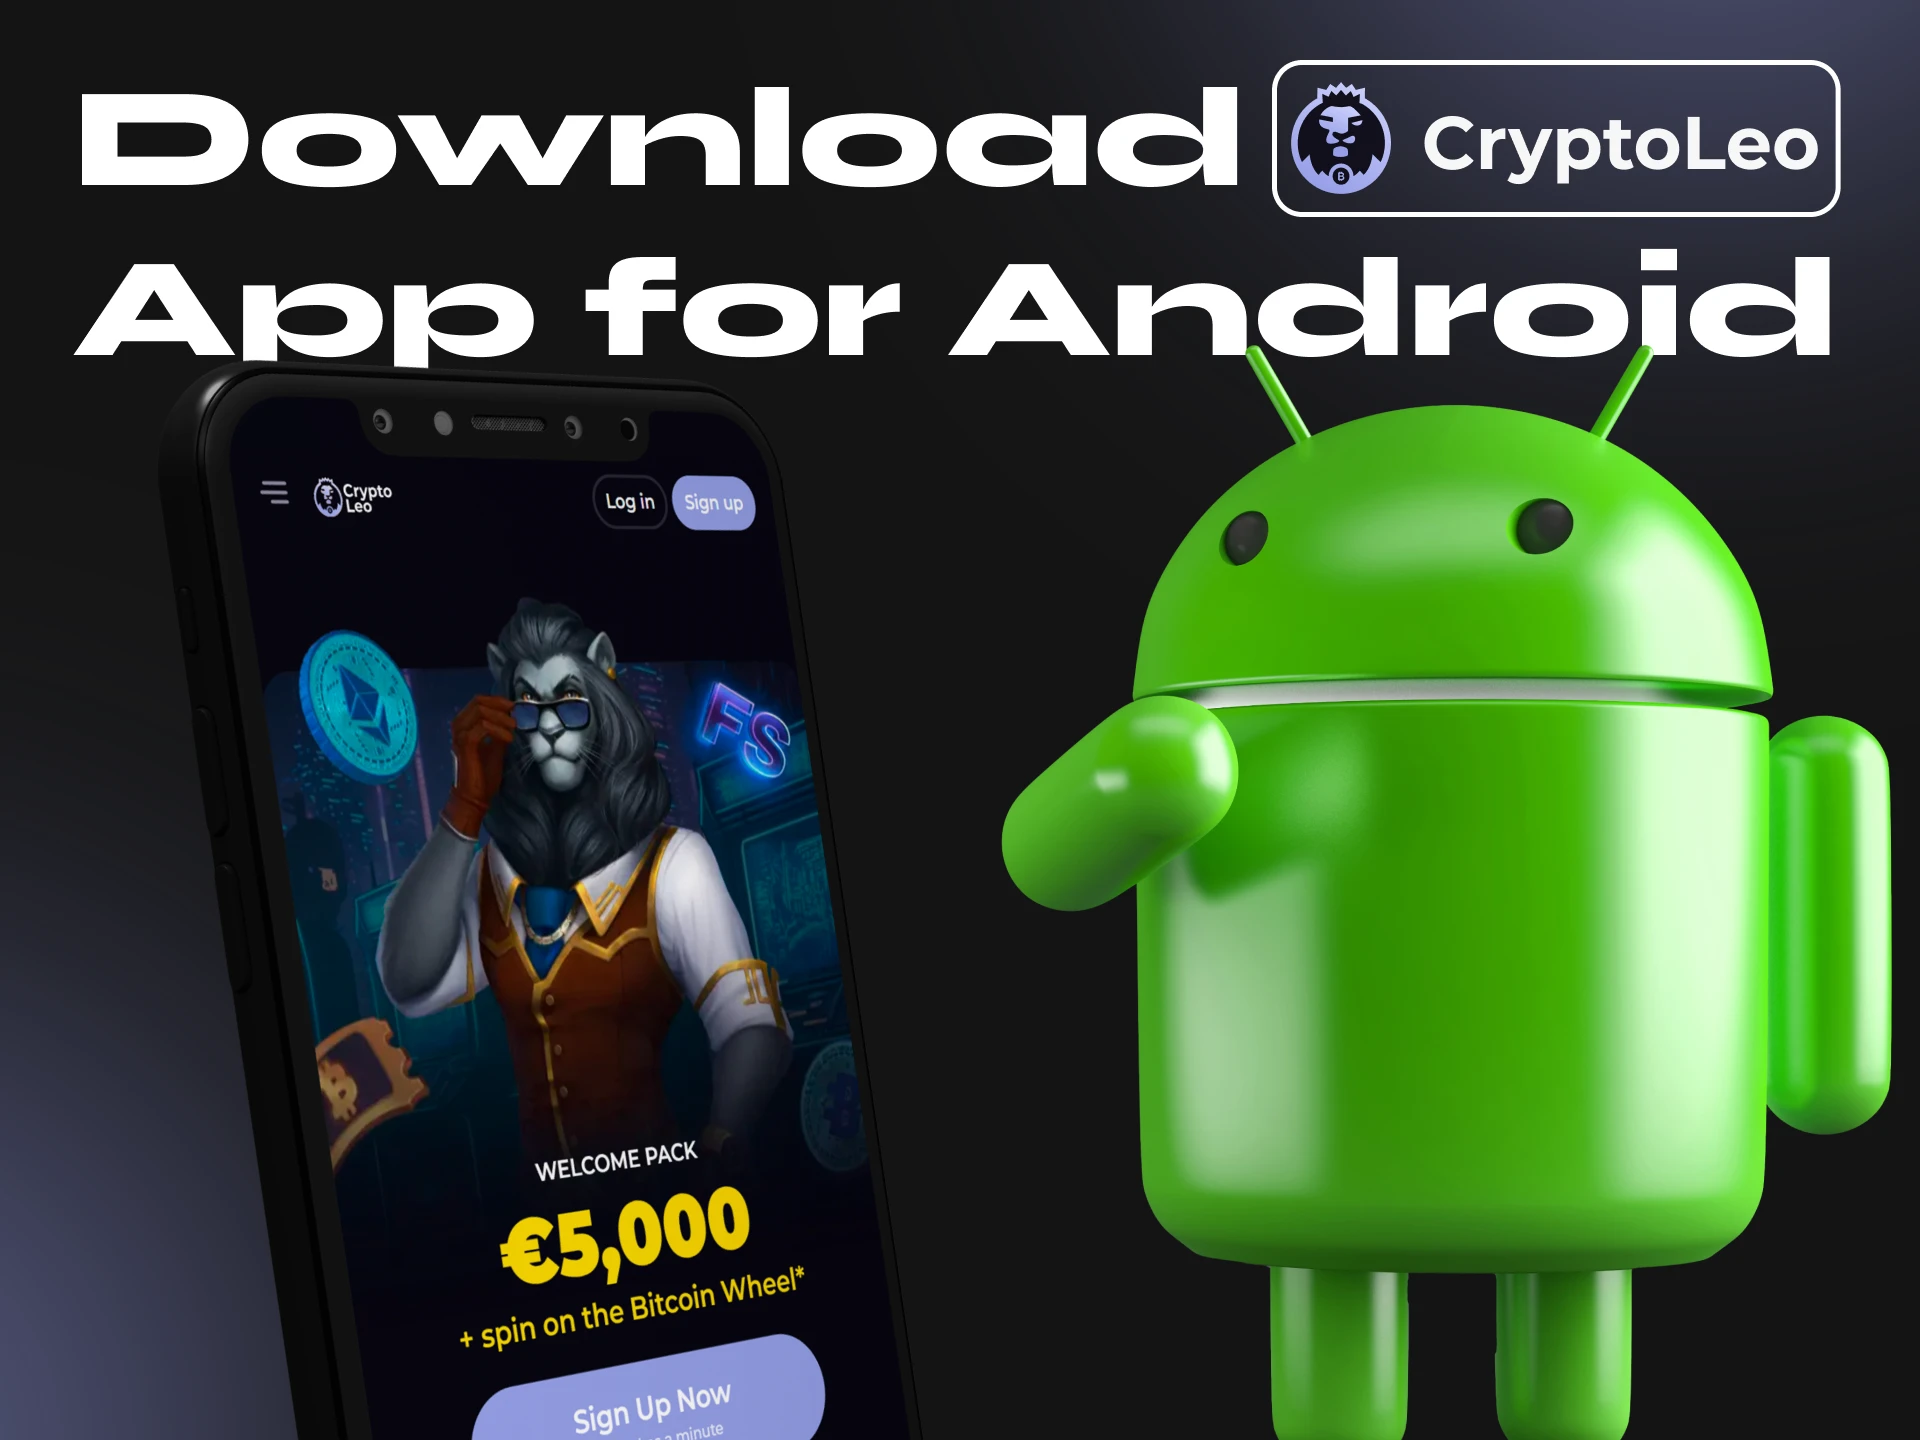 Find out how to download Cryptoleo for your Android device.